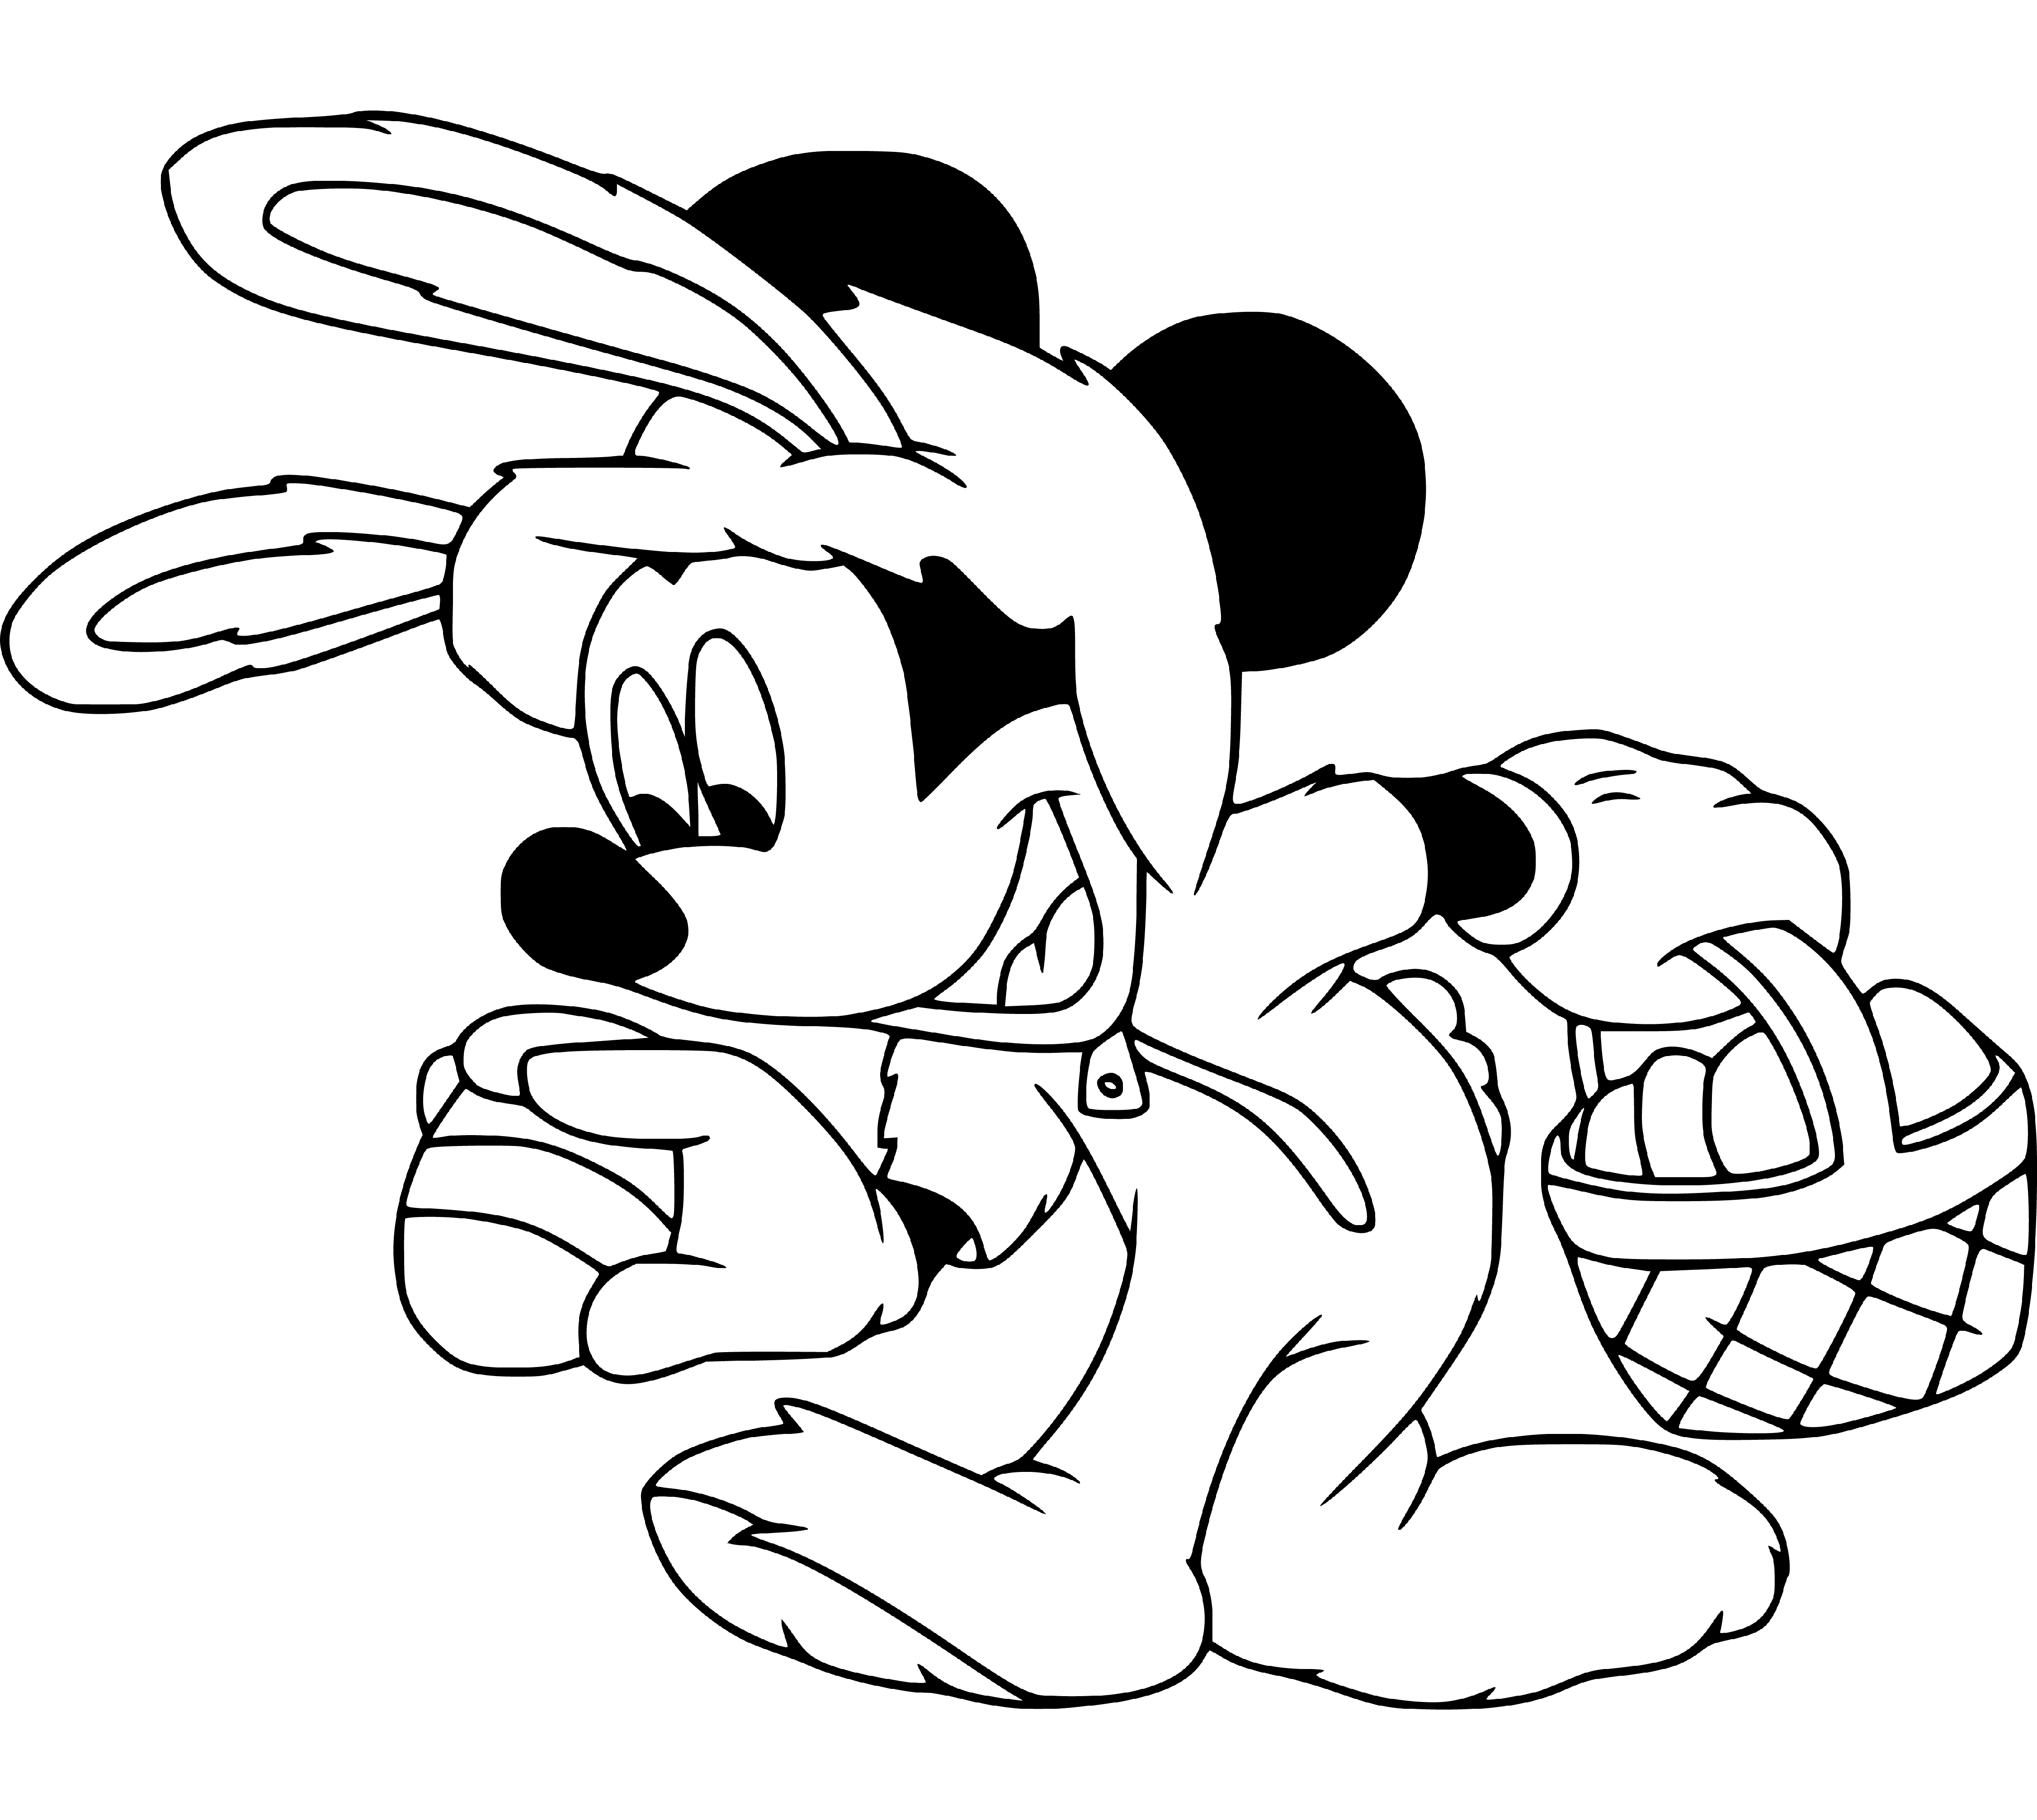 Printable Mickey and Easter Basket Coloring Page for kids.